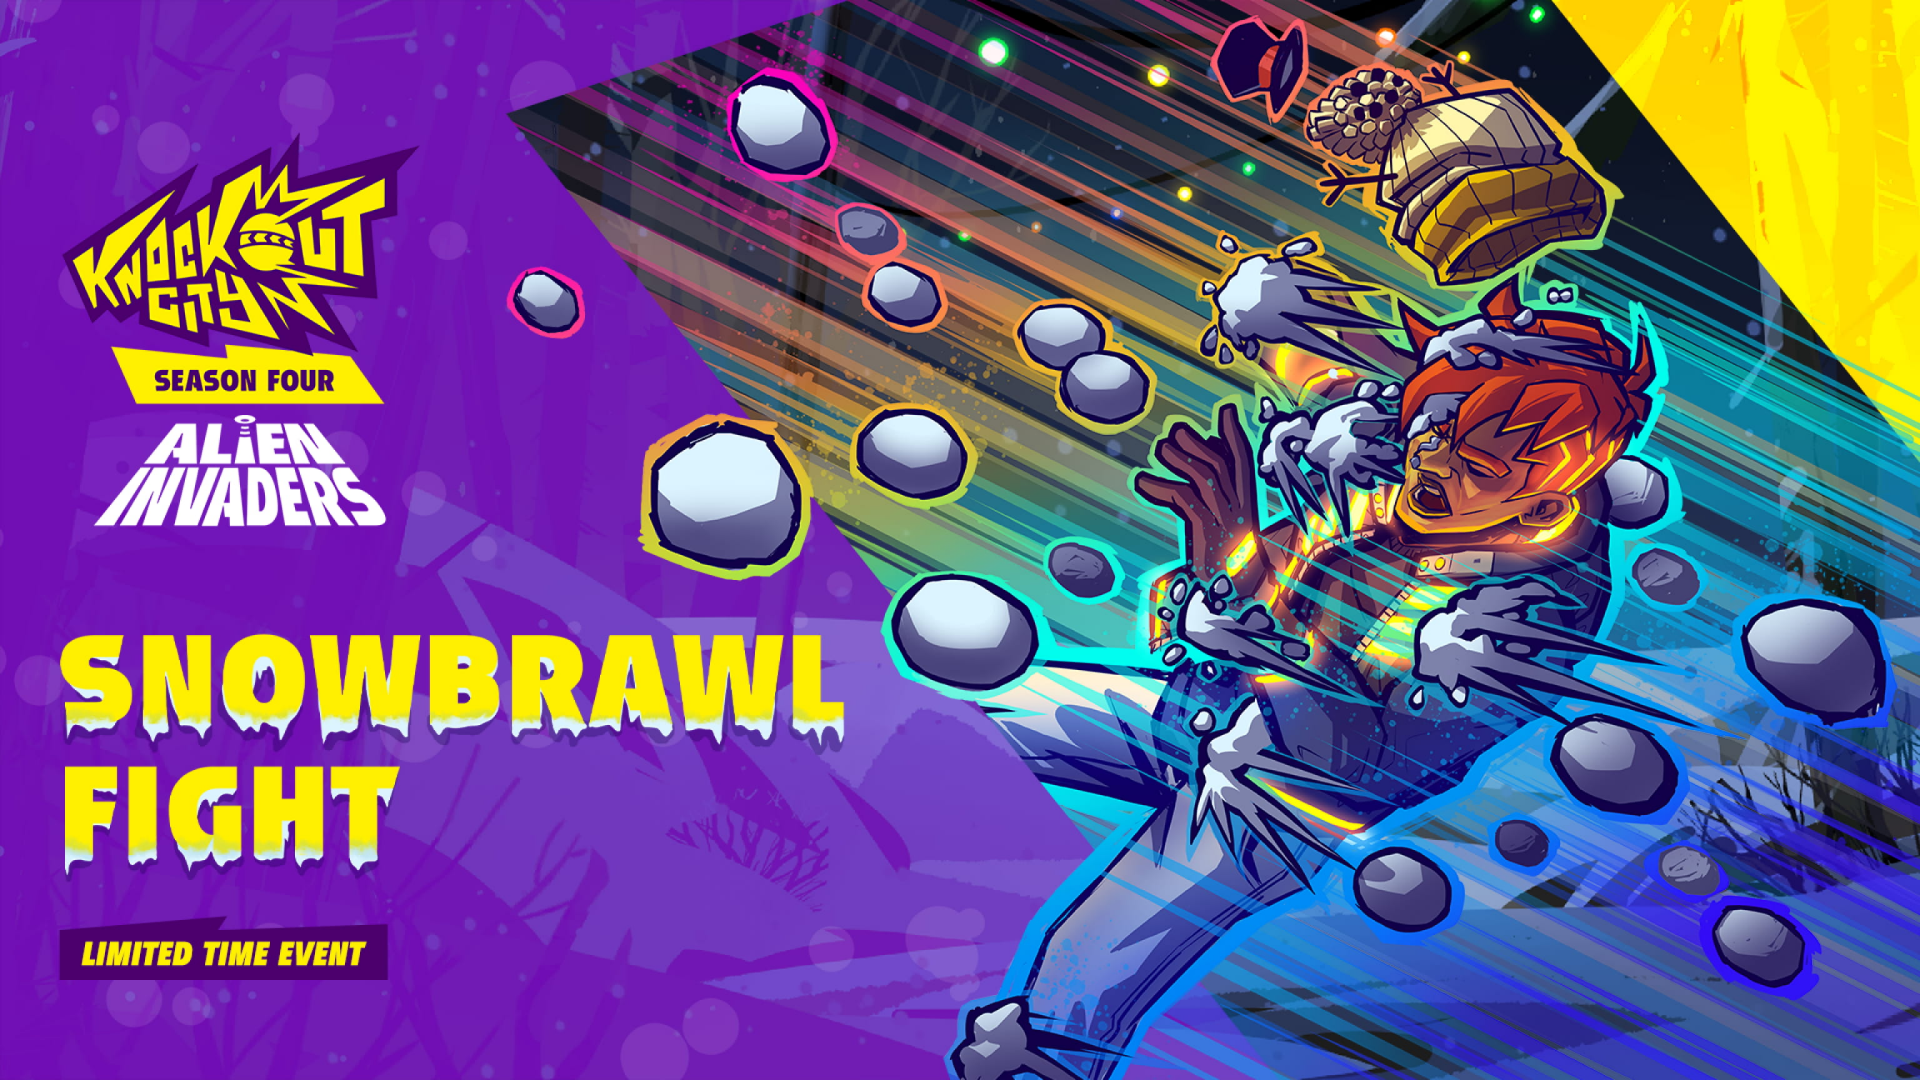 Basketbrawl Block Party Ball Crawl Holo-Ween Knockout City Heroes HD Knockout  City Wallpapers, HD Wallpapers